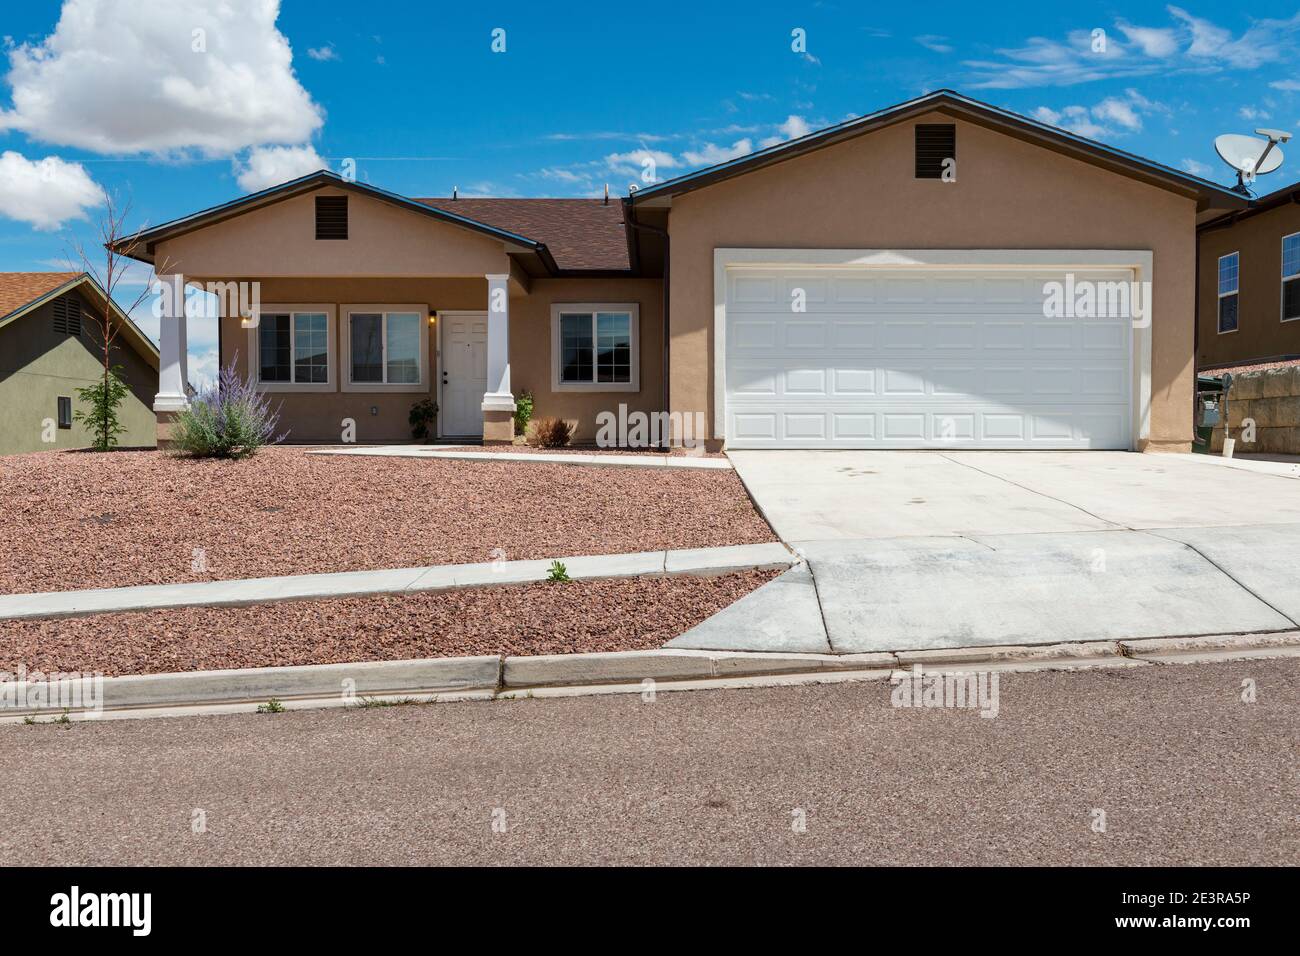 The facade of a suburban house with garage and driveway, in a suburb in the outskirts of the city of Gallup, New Mexico, USA Stock Photo